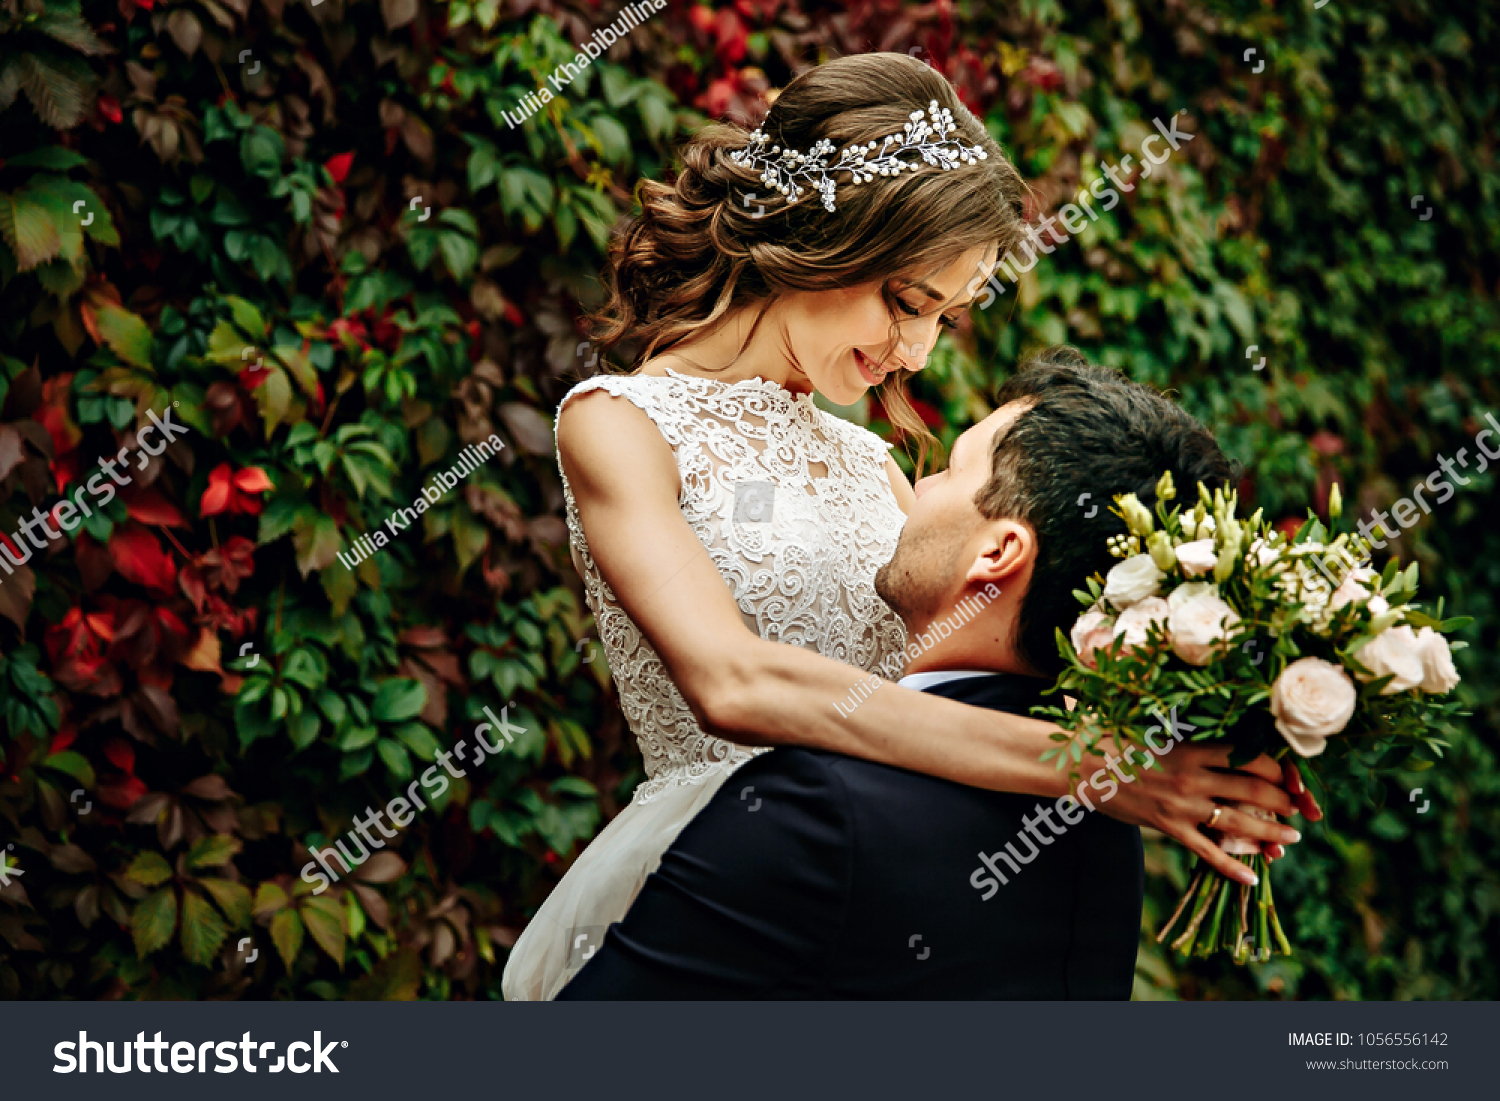 Happy young bride and groom on their wedding day. Wedding couple - new family! wedding dress. Bridal wedding bouquet of flowers #1056556142